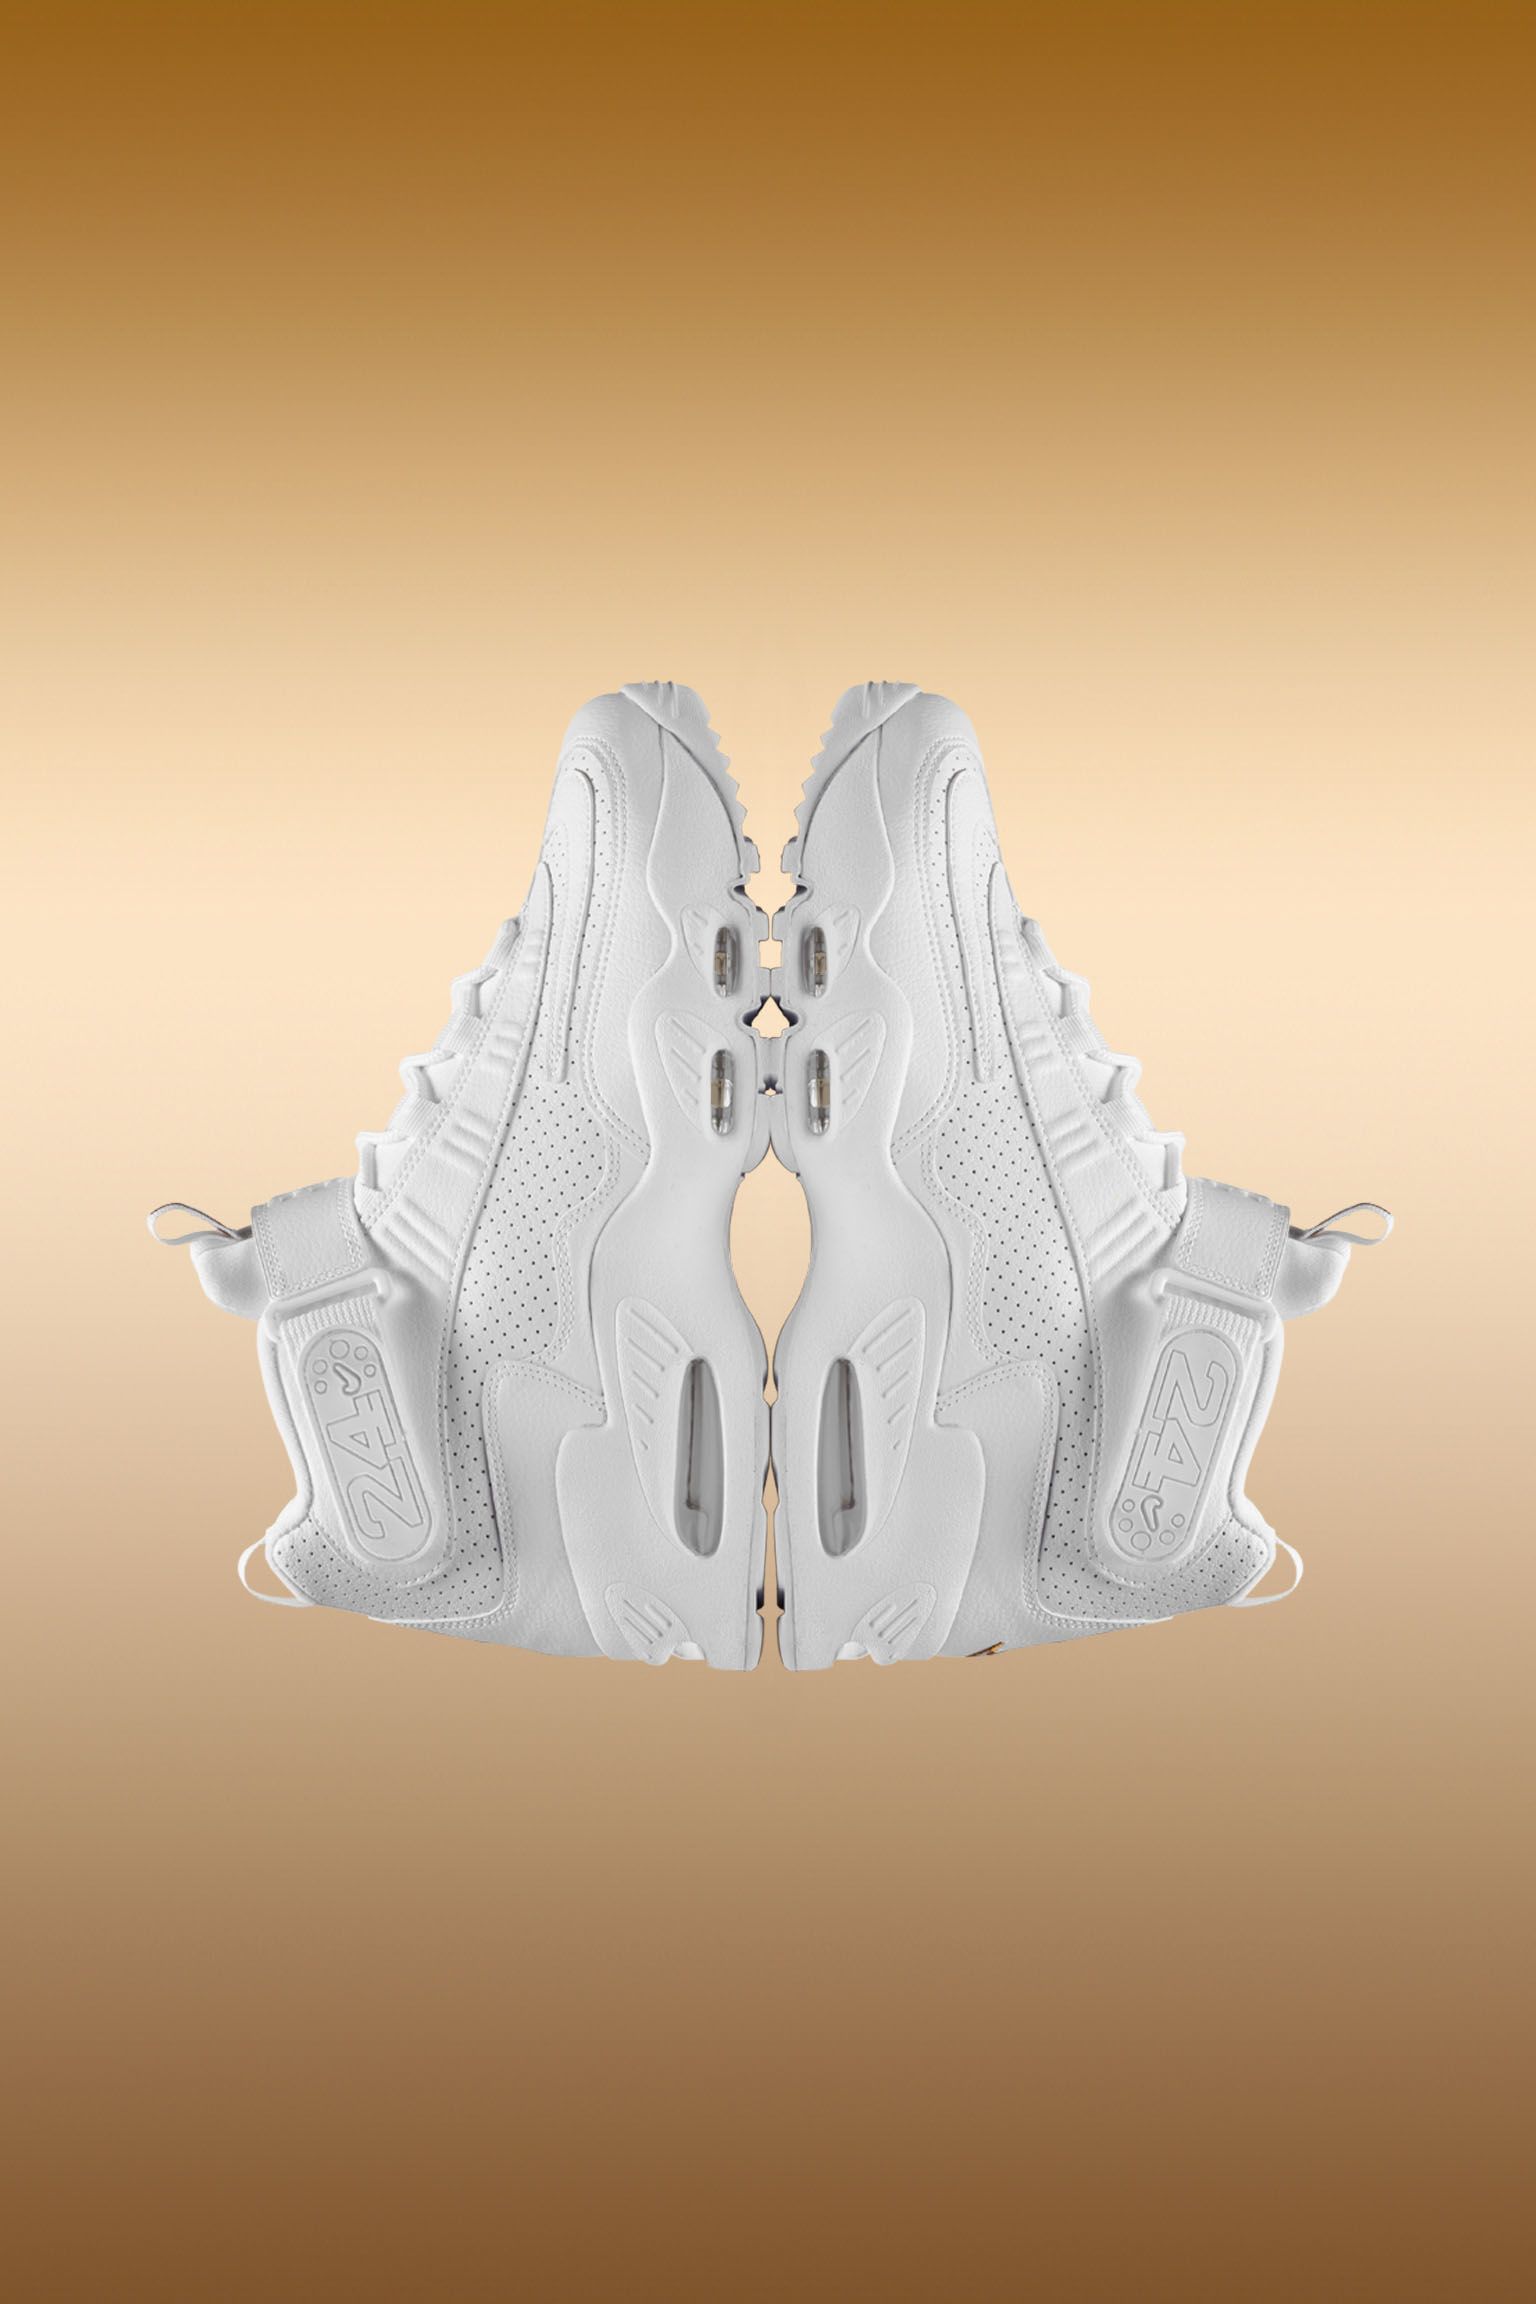 all white griffey shoes